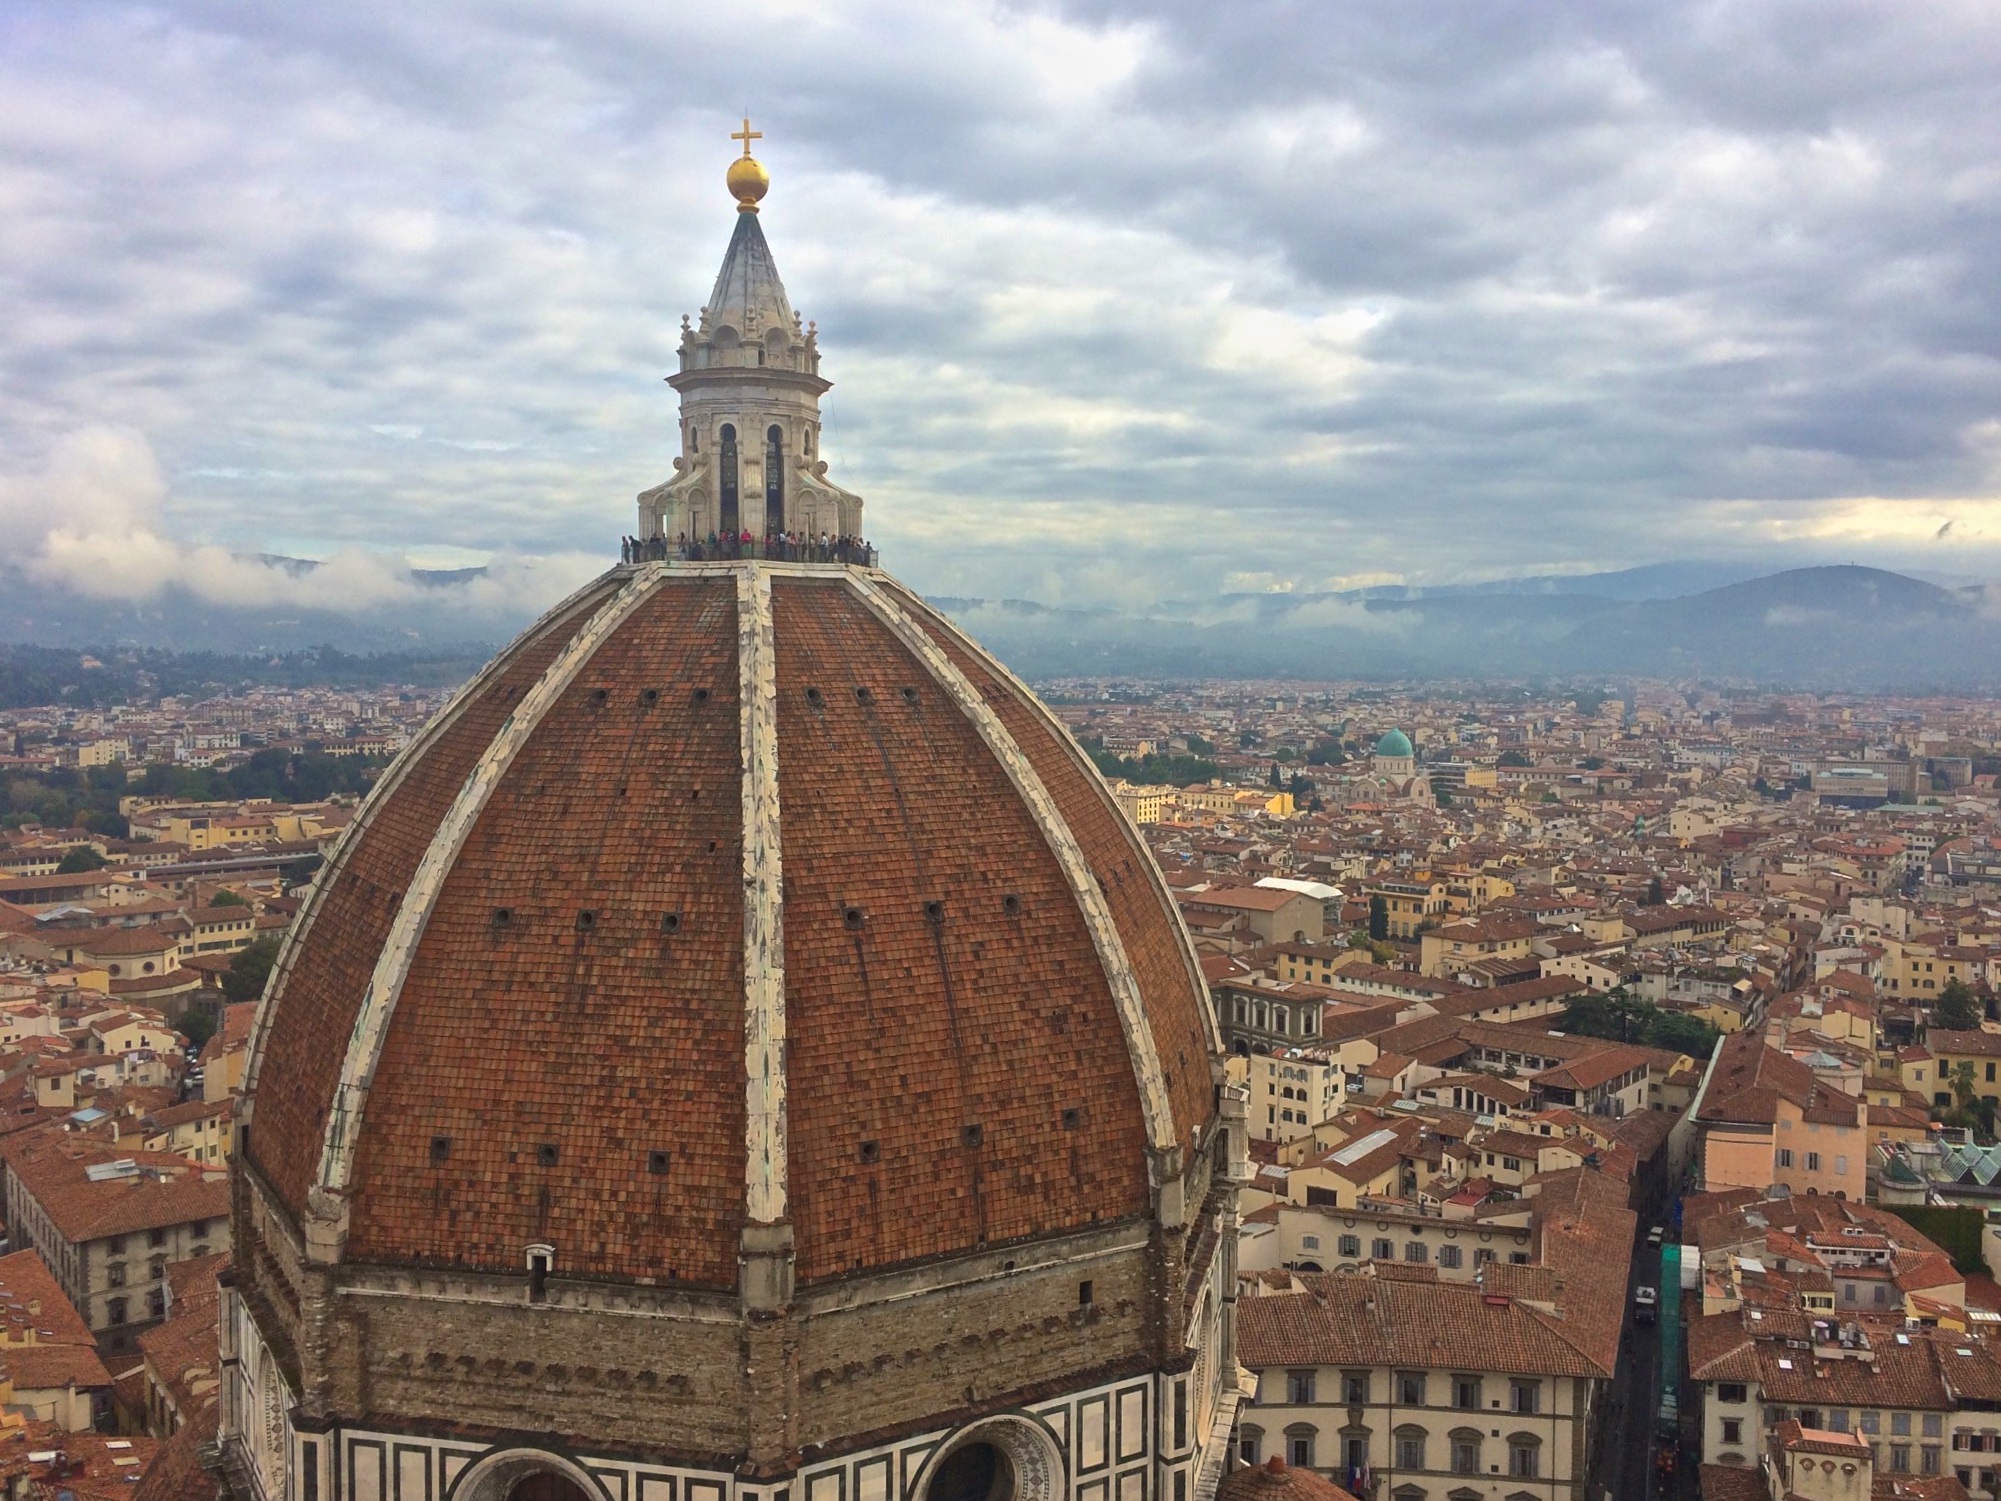 View from Giotto's Campanile, Florence